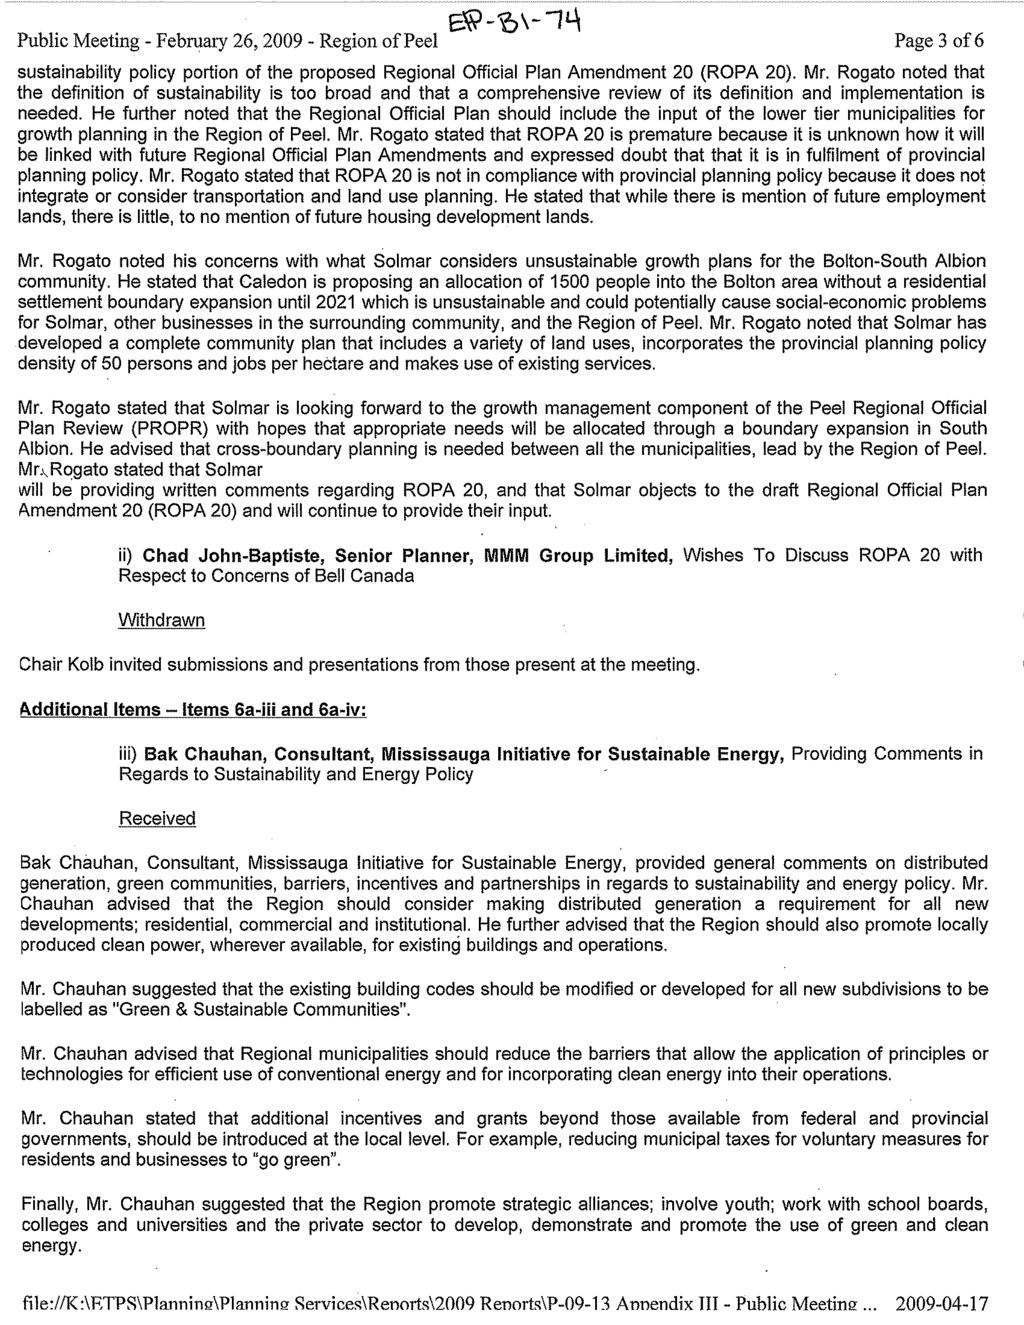 Public Meeting - February 26,2009 - Region of Peel e-%\-74 Page 3 of 6 sustainability policy portion of the proposed Regional Official Plan Amendment 20 (ROPA 20). Mr.